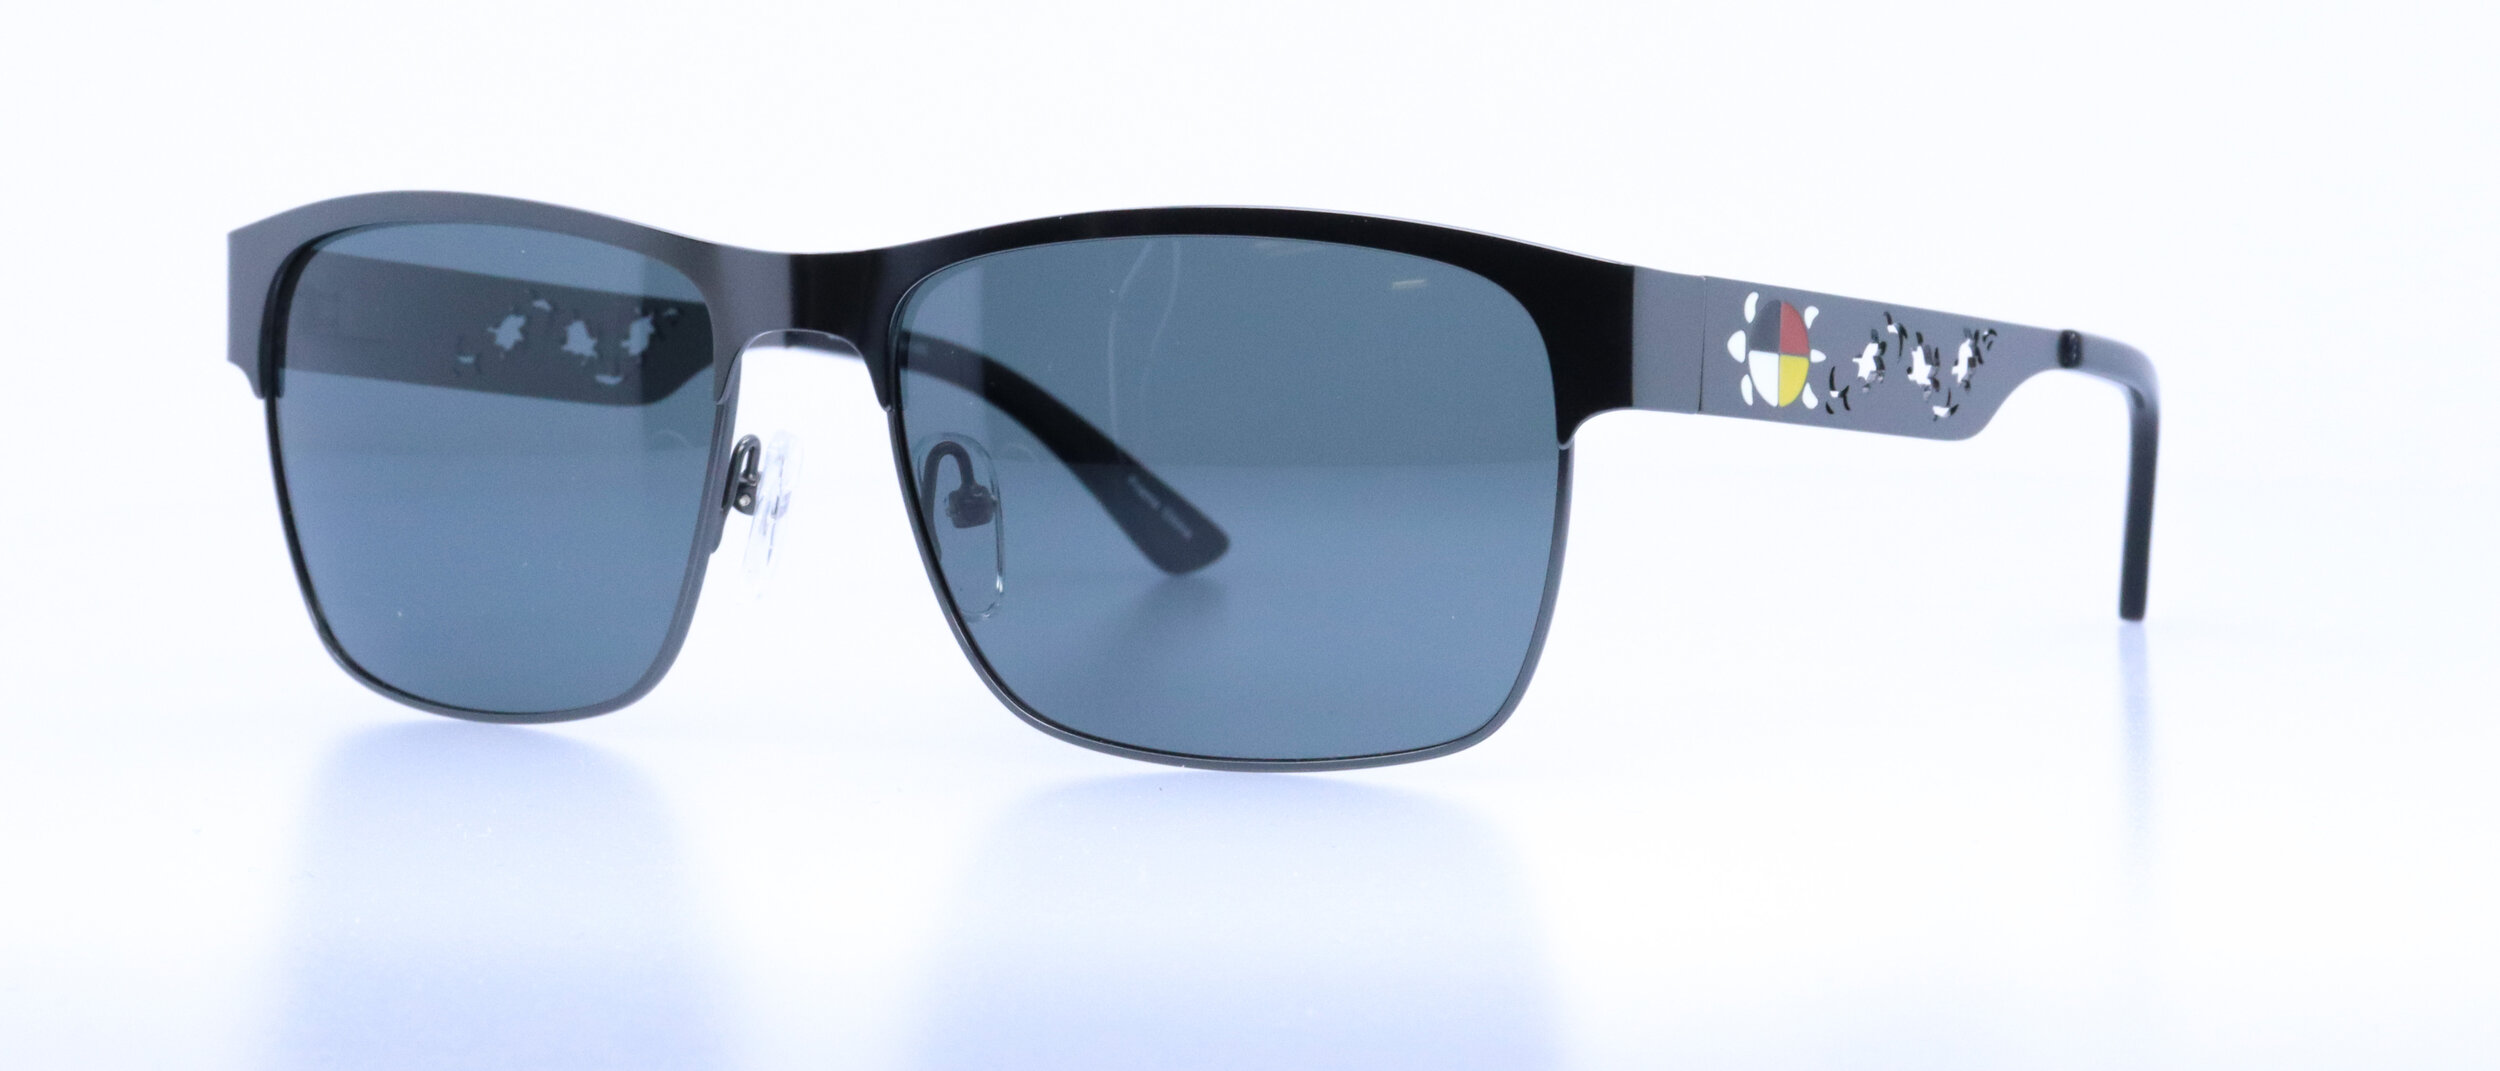  Turtle 2 by Virgil "Smoker" Marchand: 58-16-140, Available in Gunmetal or Brown (Polarized Sun) 